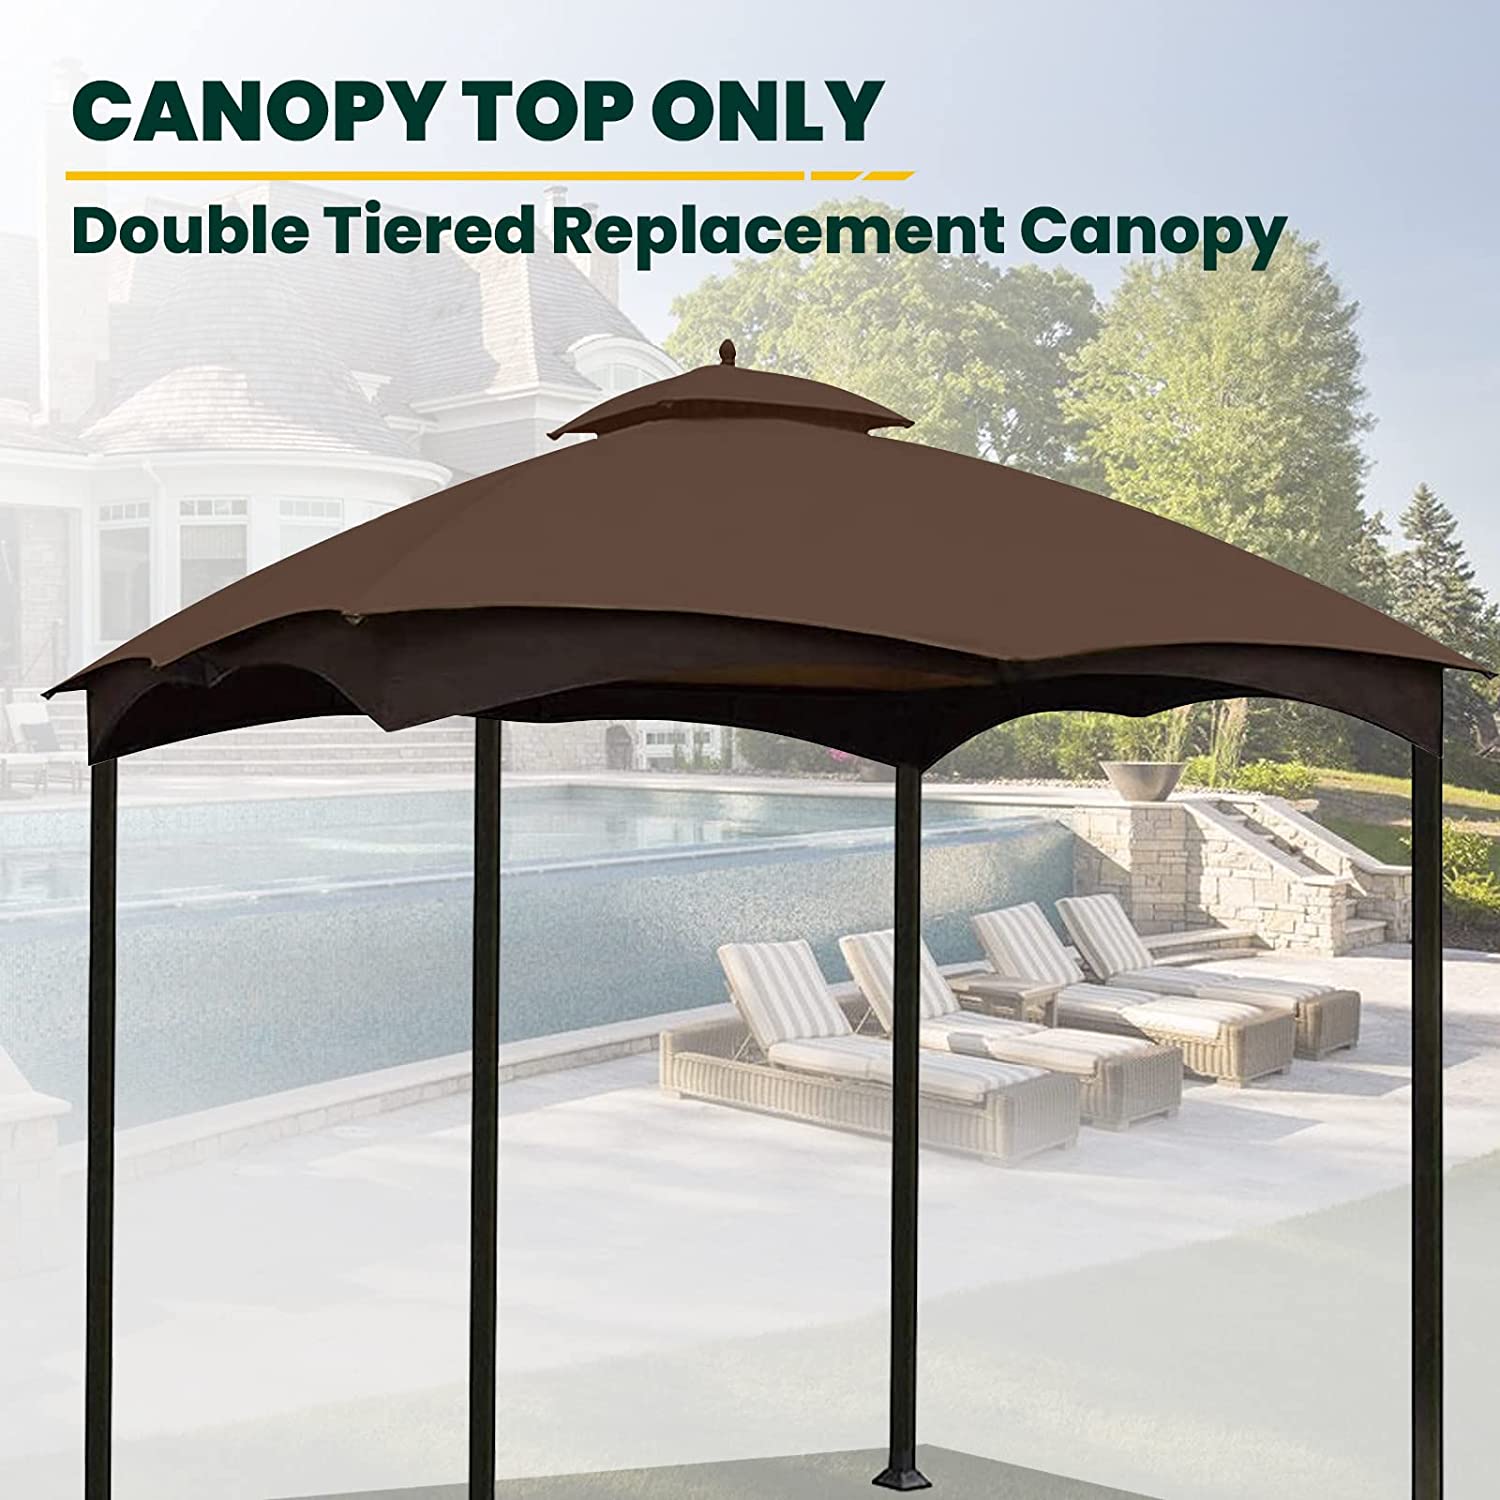 OLILAWN 10' x 12' Outdoor Gazebo Replacement Canopy Top, Double-Tier Gazebo Roof Cover